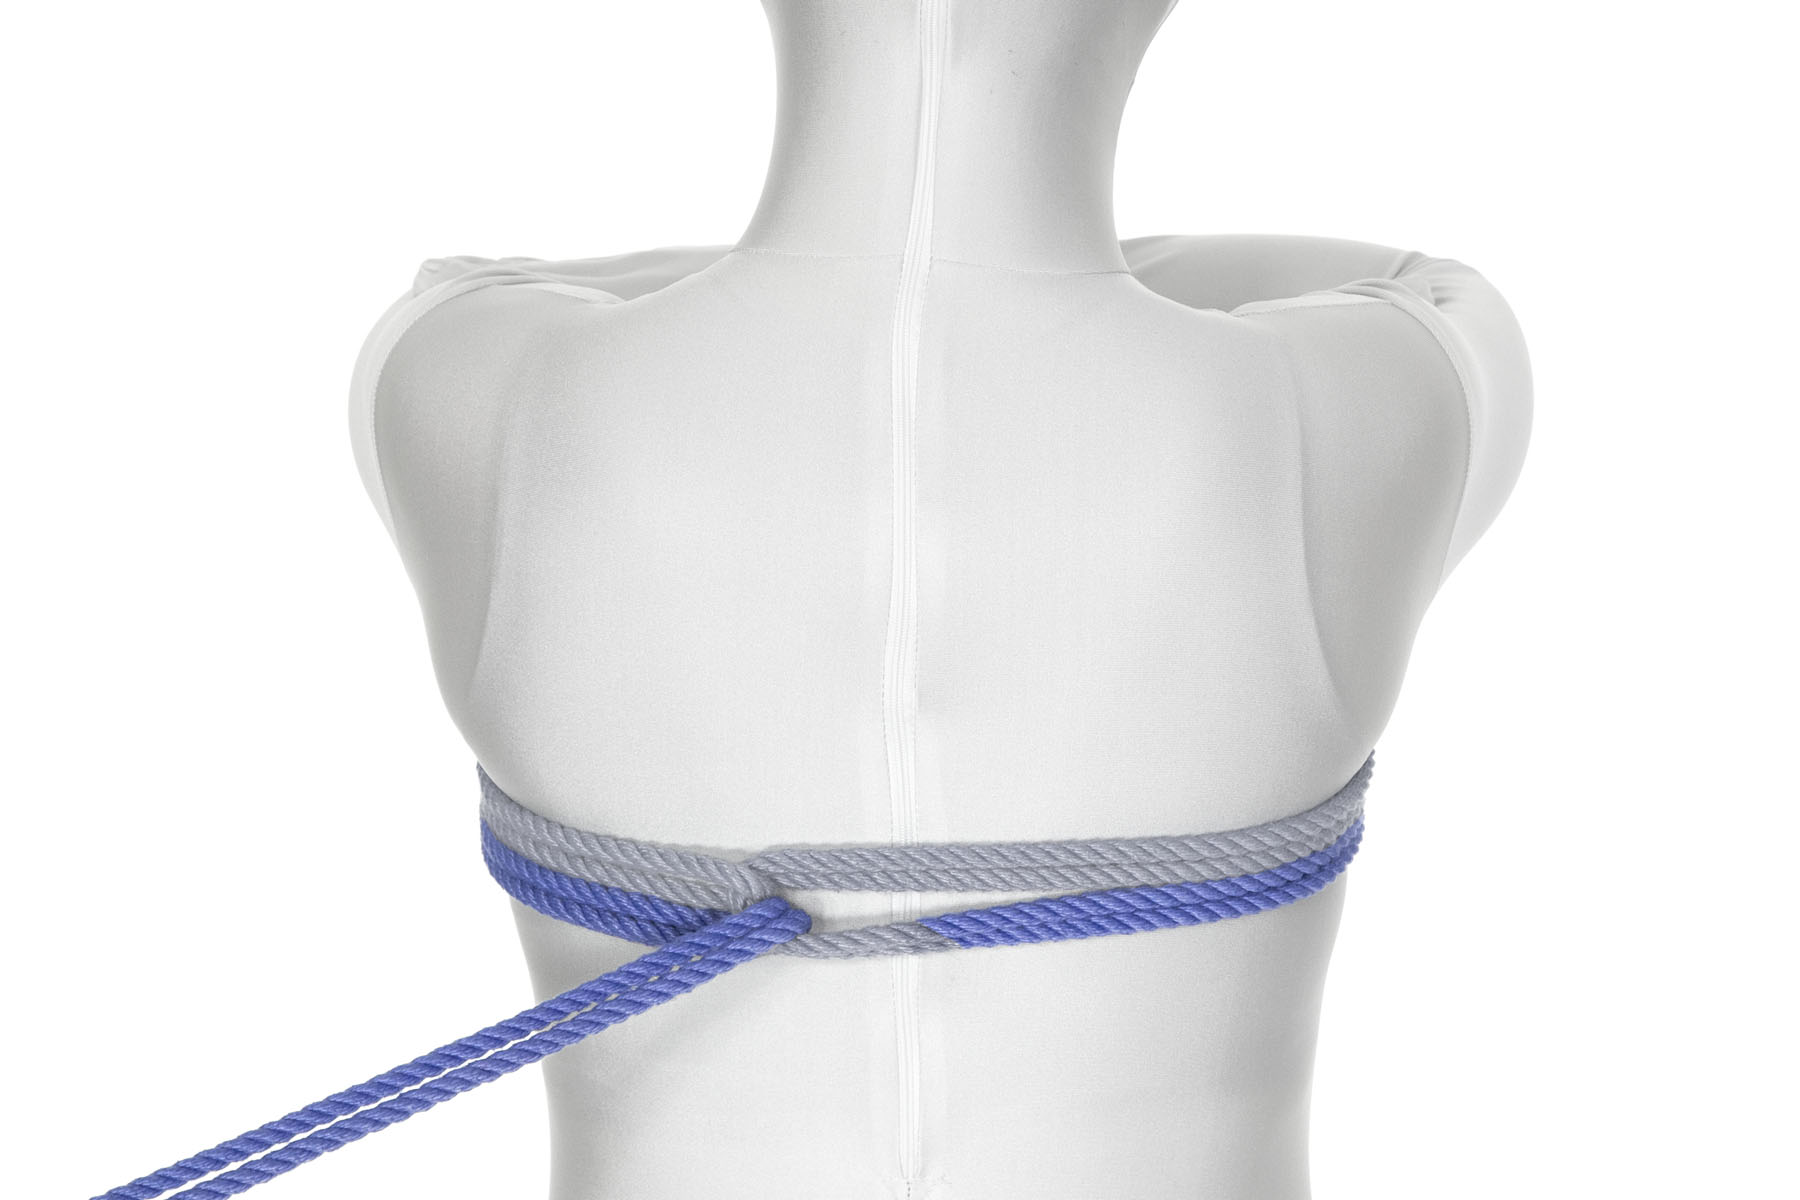 The rope makes a second wrap all the way around the chest, just under the first wrap. It makes a reverse tension through the U shape created by the first reverse tension and is pulled taut off to the left of the frame.